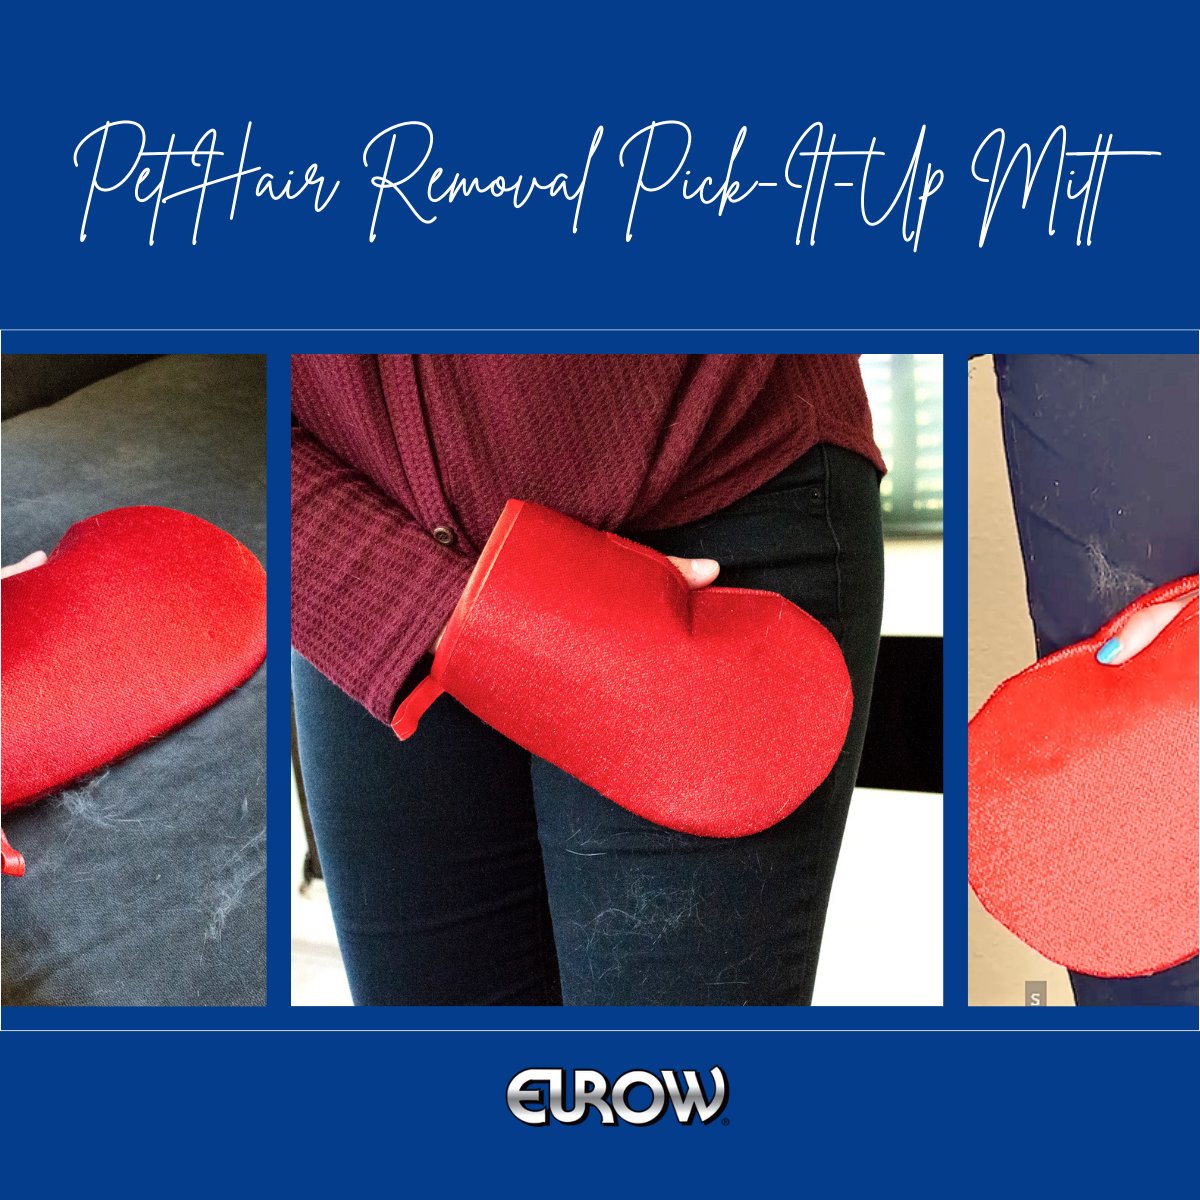 Tired of pet hair taking over your home? Say goodbye to pesky fur with our  Pick-it-Up Mitt! 
🛒ow.ly/y4Y750RfscW

#pethairremoval #petcare #eurow #amazonfind #easycleaninghack #homehack #cleanhome #pethair #lintremoval #ecofriendly